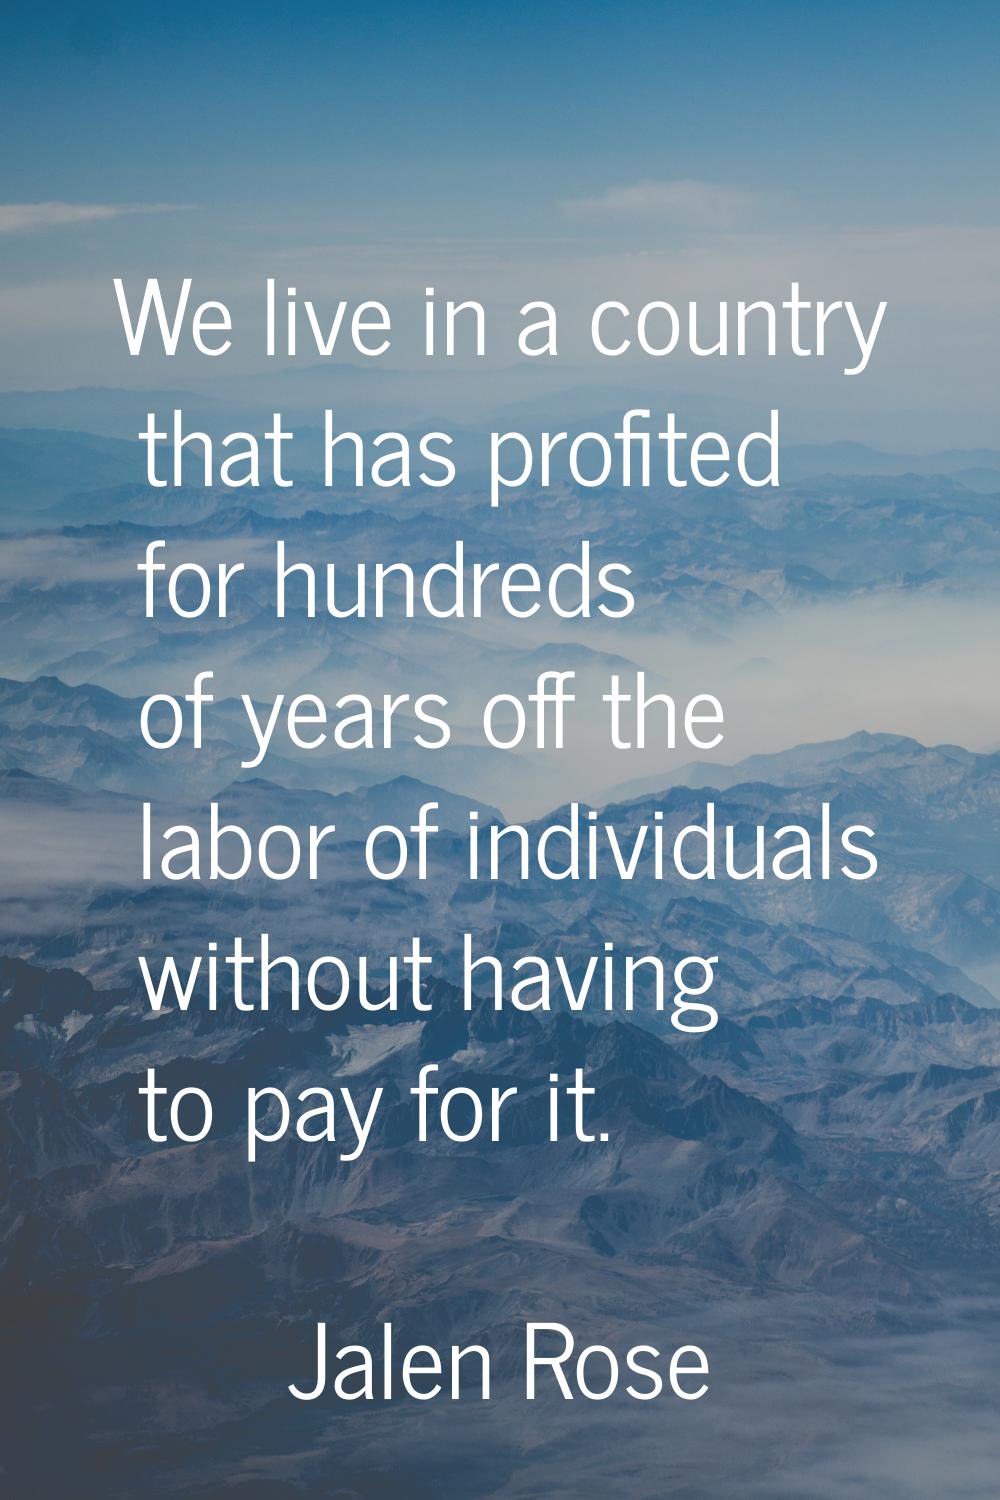 We live in a country that has profited for hundreds of years off the labor of individuals without h